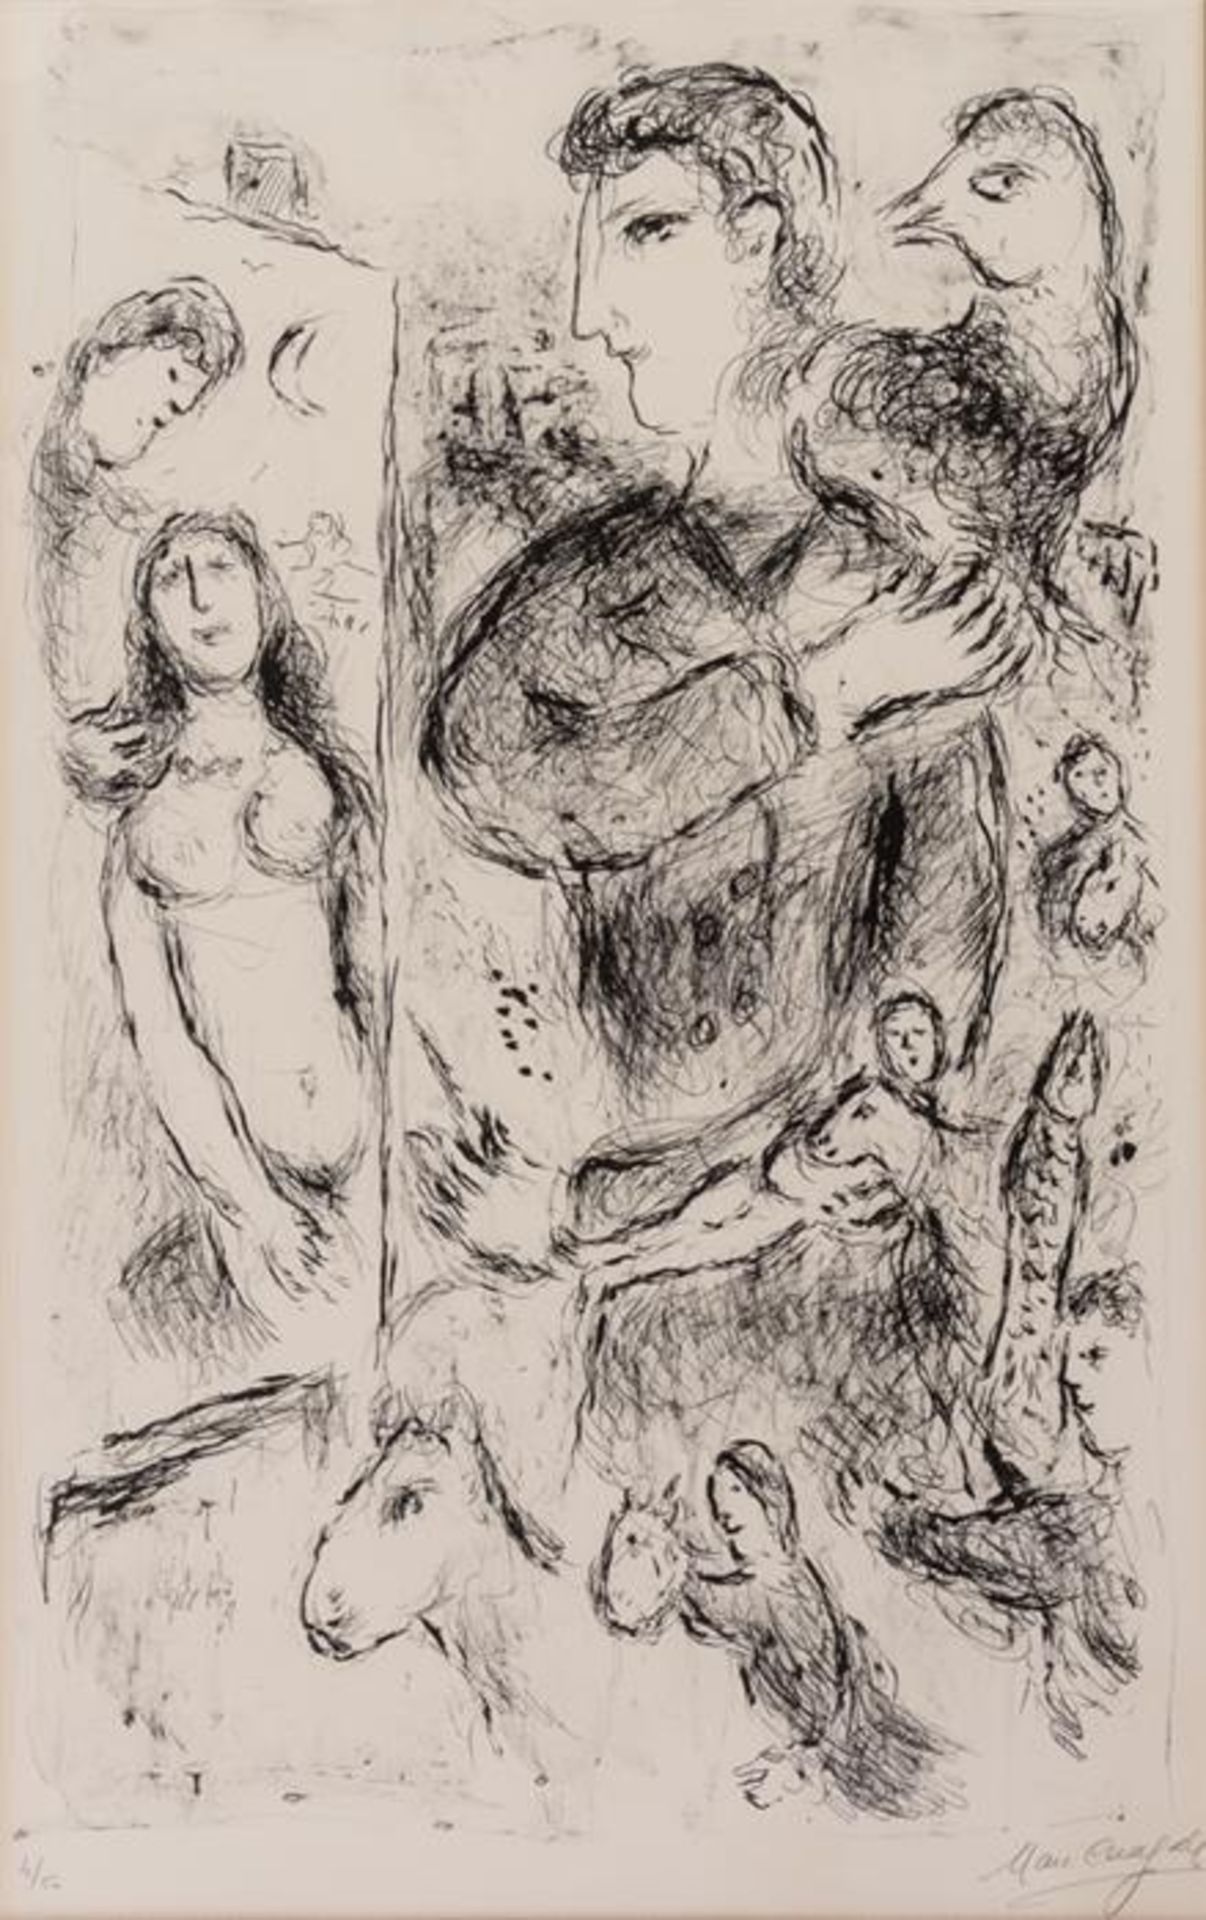 Marc CHAGALL (1887-1985), Création, Sehr grosse Lithographie, 4/50, signiert